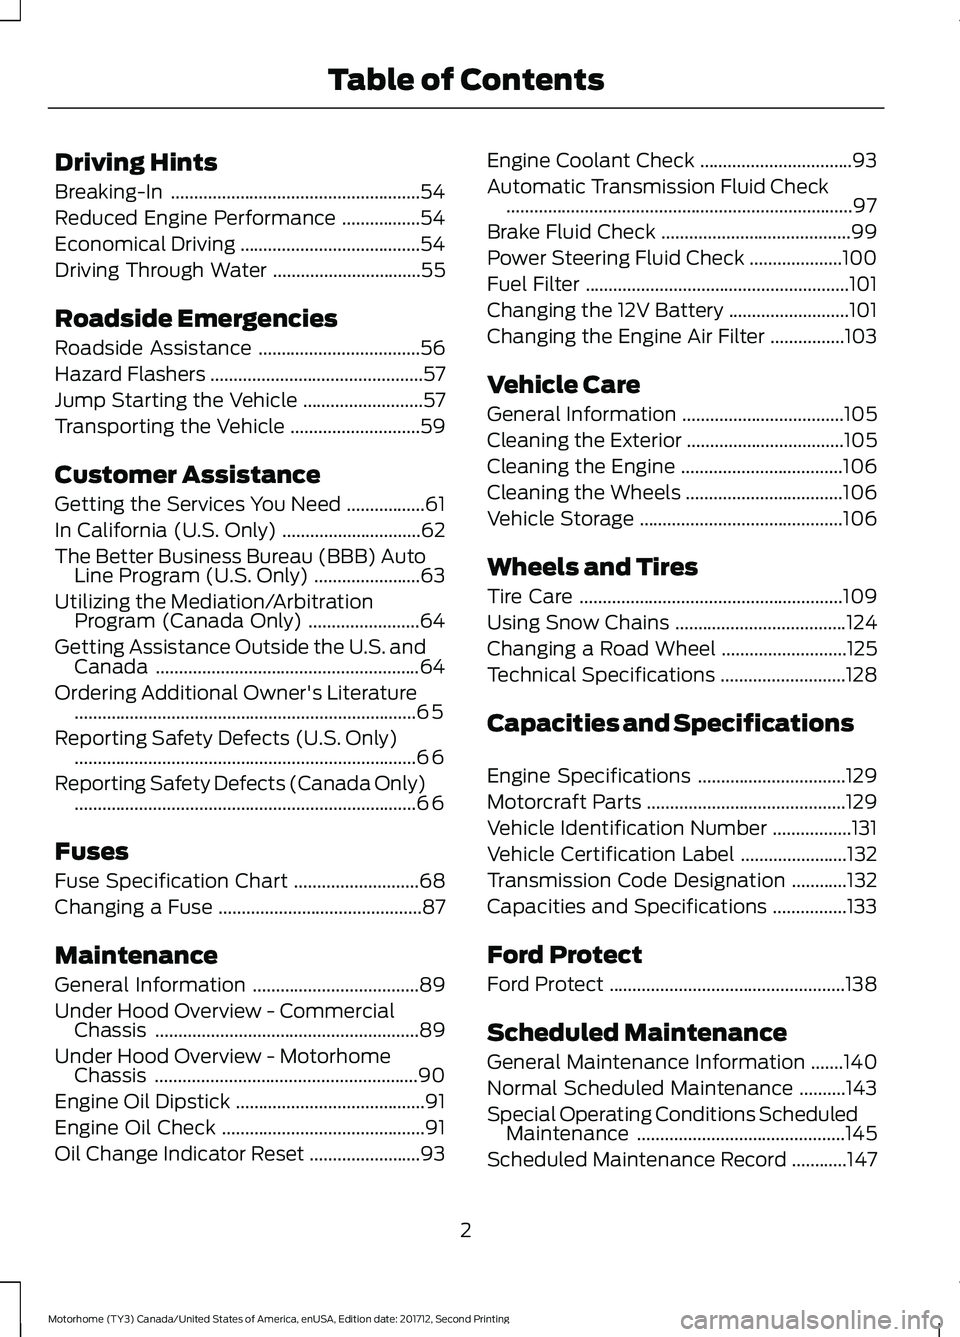 FORD F-53 2018  Owners Manual Driving Hints
Breaking-In
......................................................54
Reduced Engine Performance .................
54
Economical Driving .......................................
54
Driving